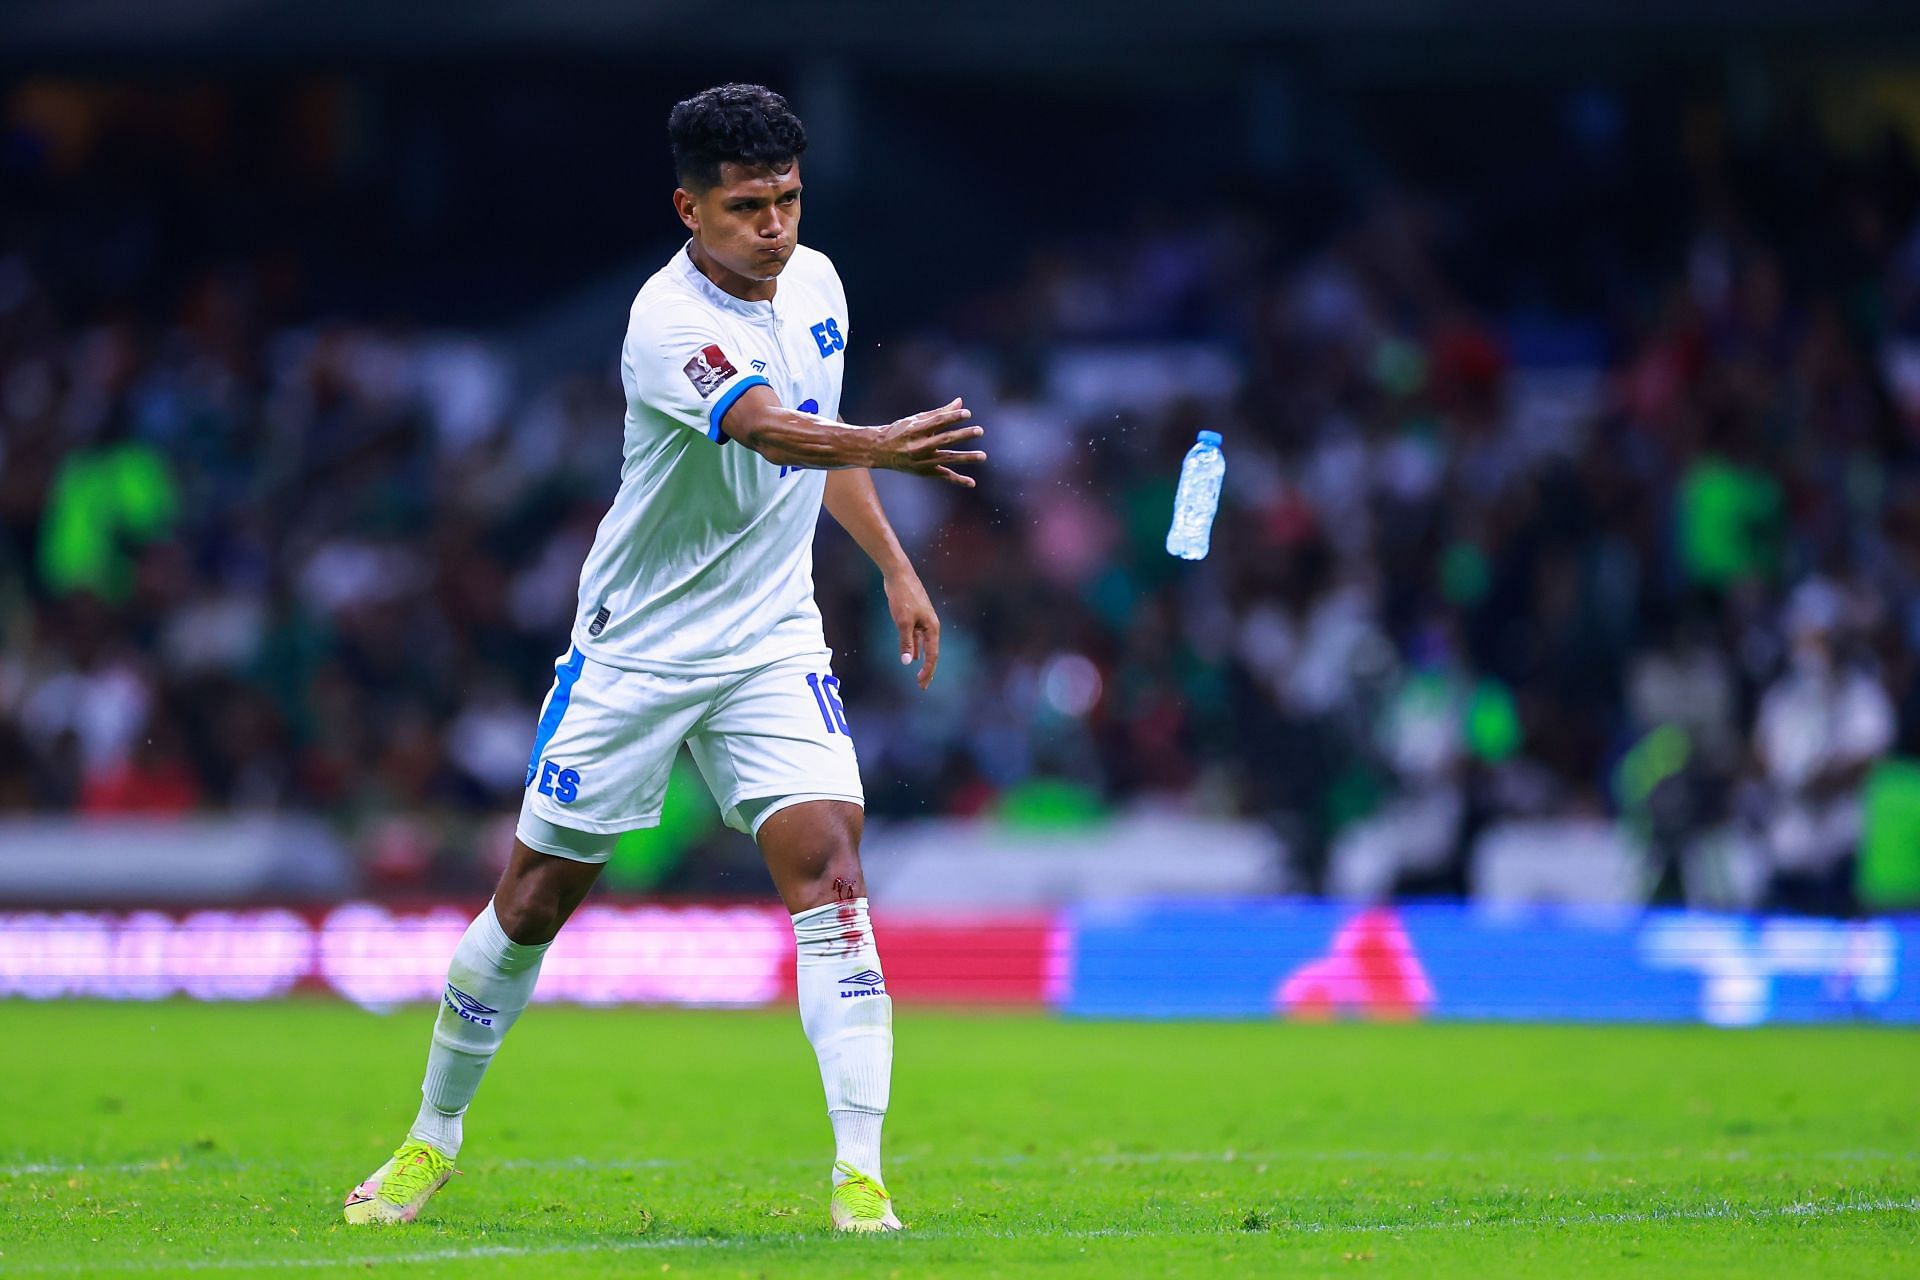 El Salvador and Guatemala will square off in an international friendly